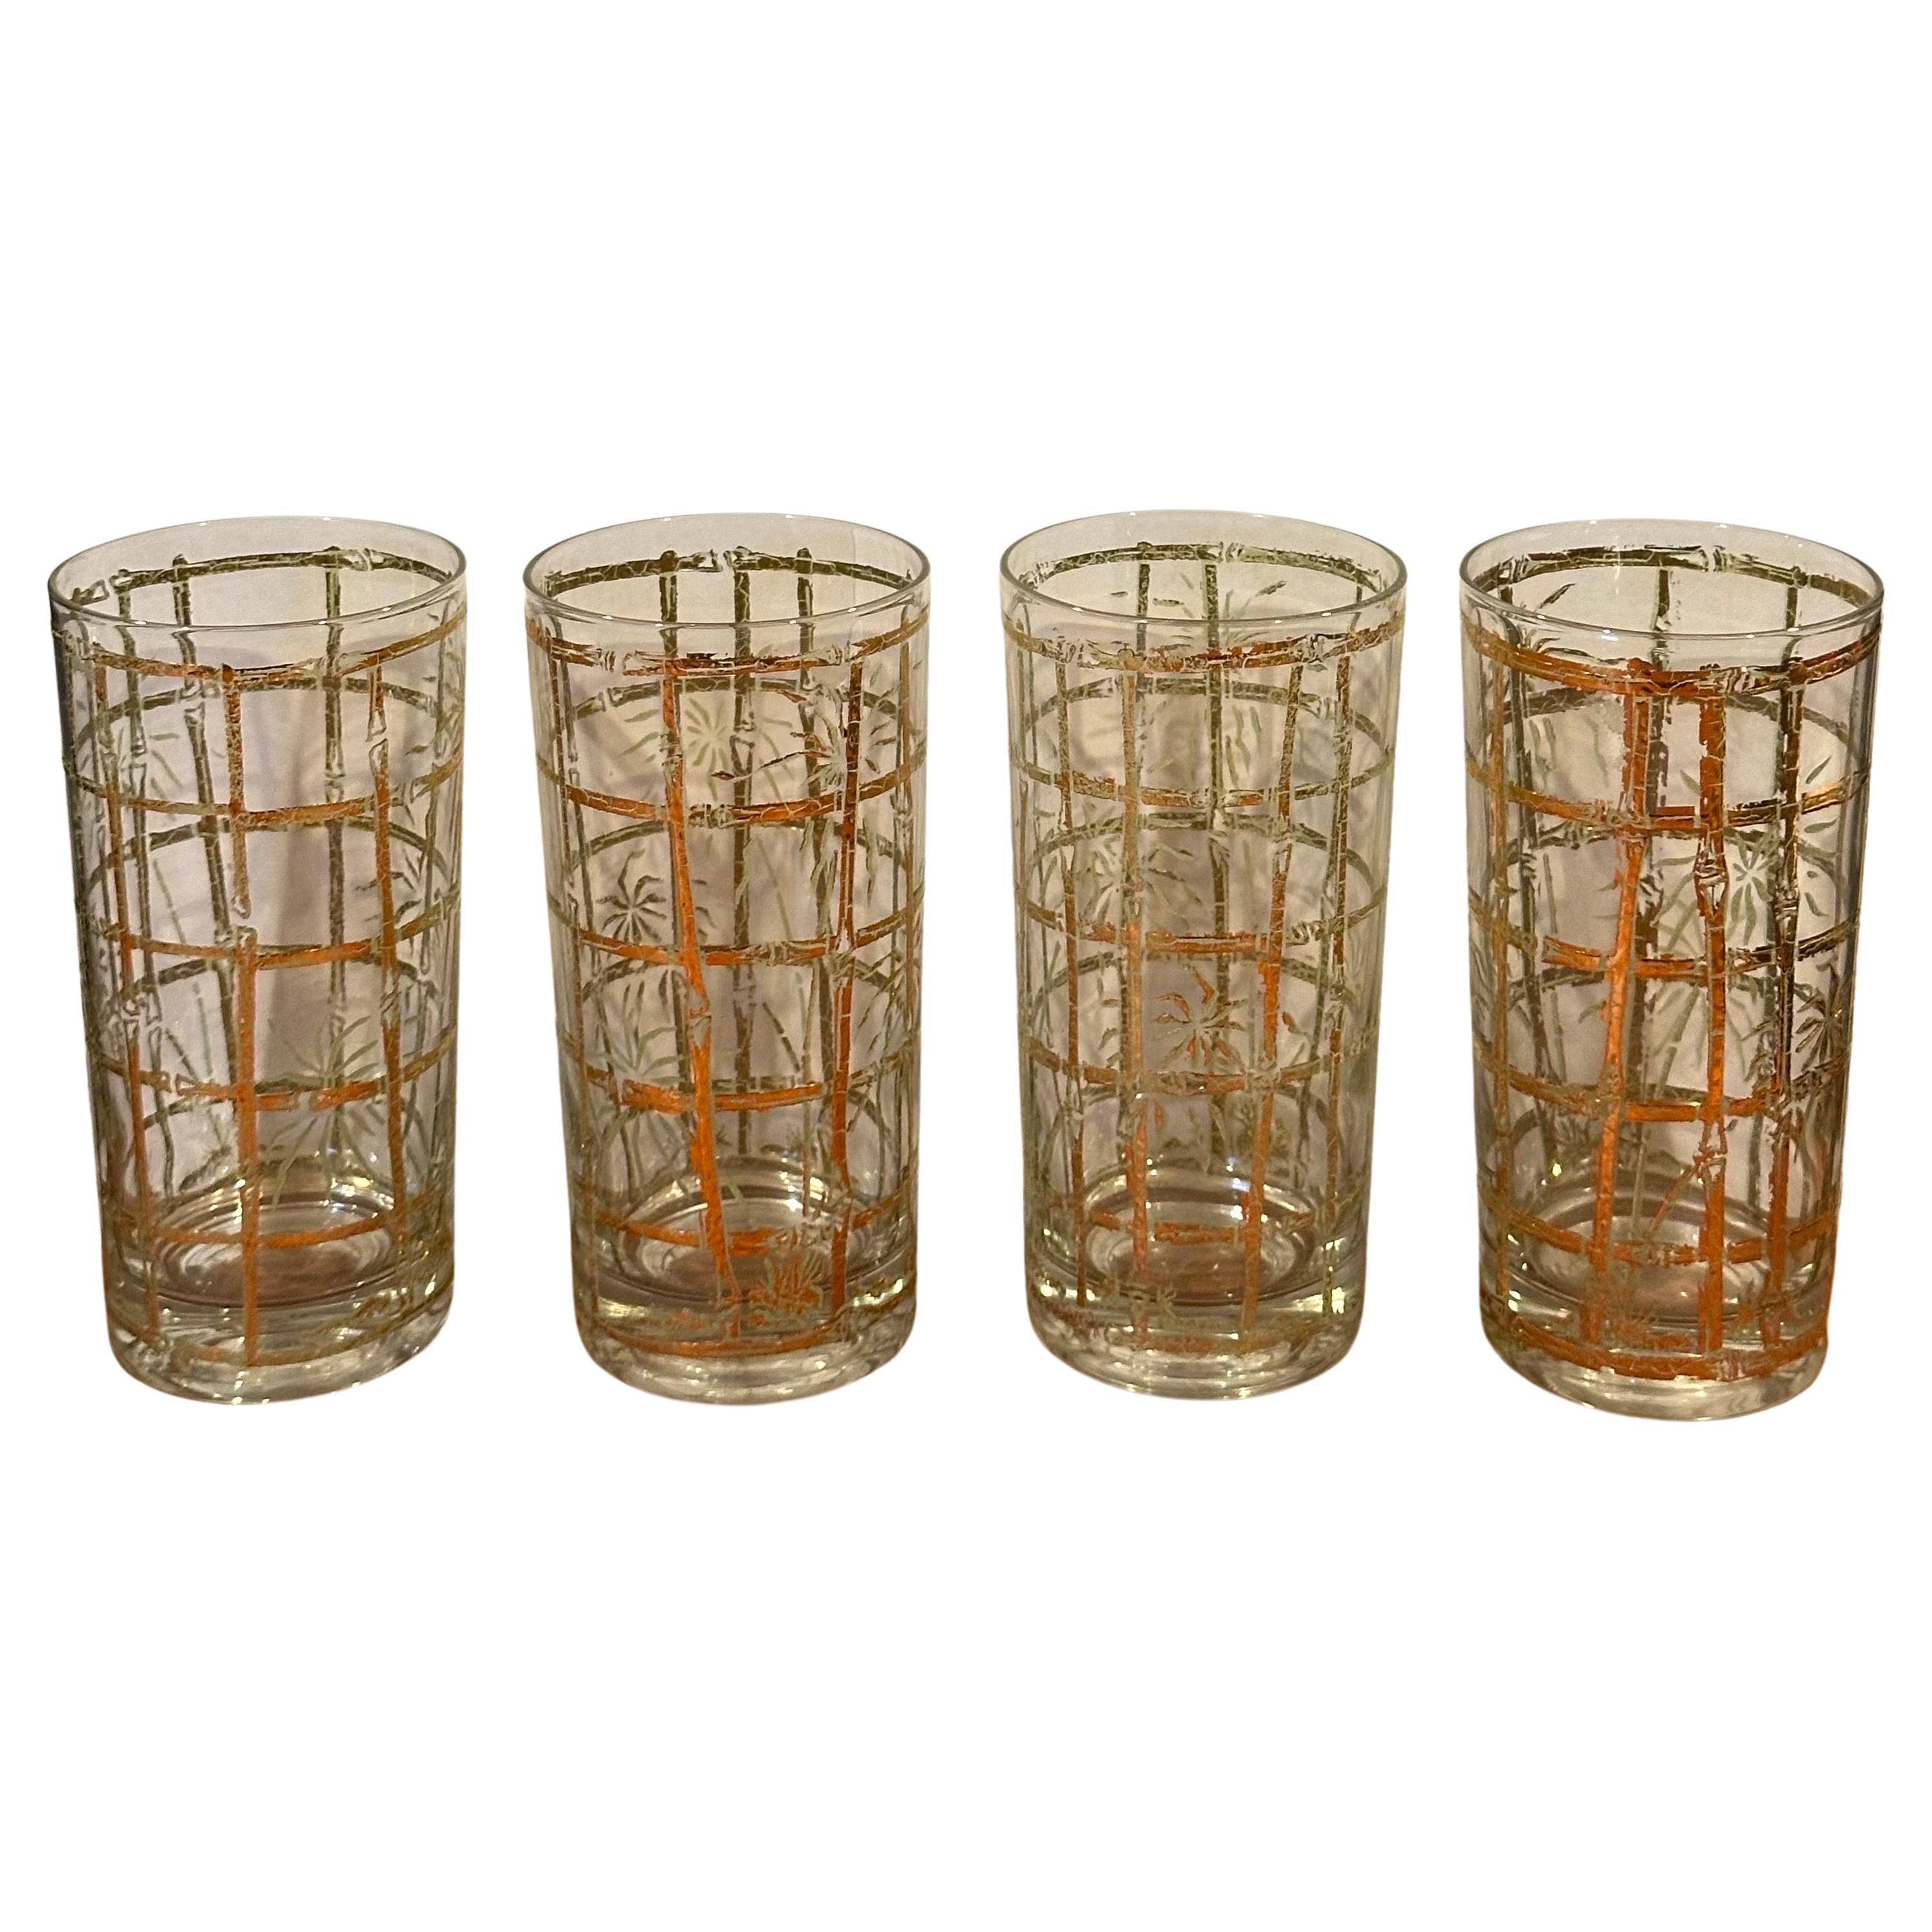 Set of Four Retro "Bamboo" Motif High-Ball Cocktail Glasses by Culver LTD